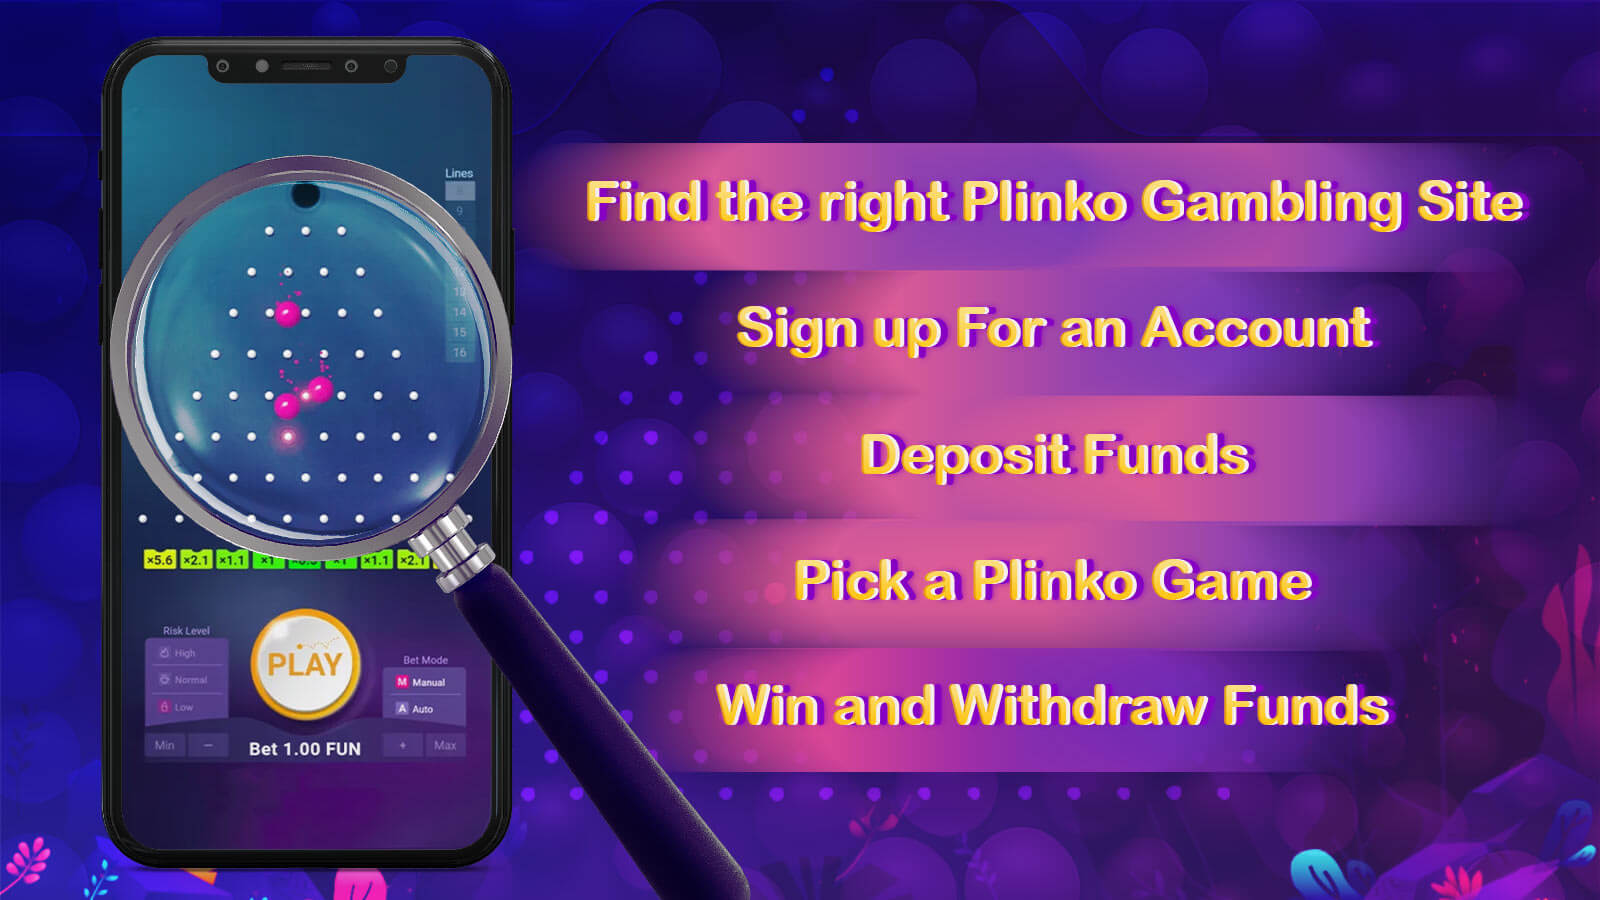 How to Play Plinko at The Best British Gambling Sites